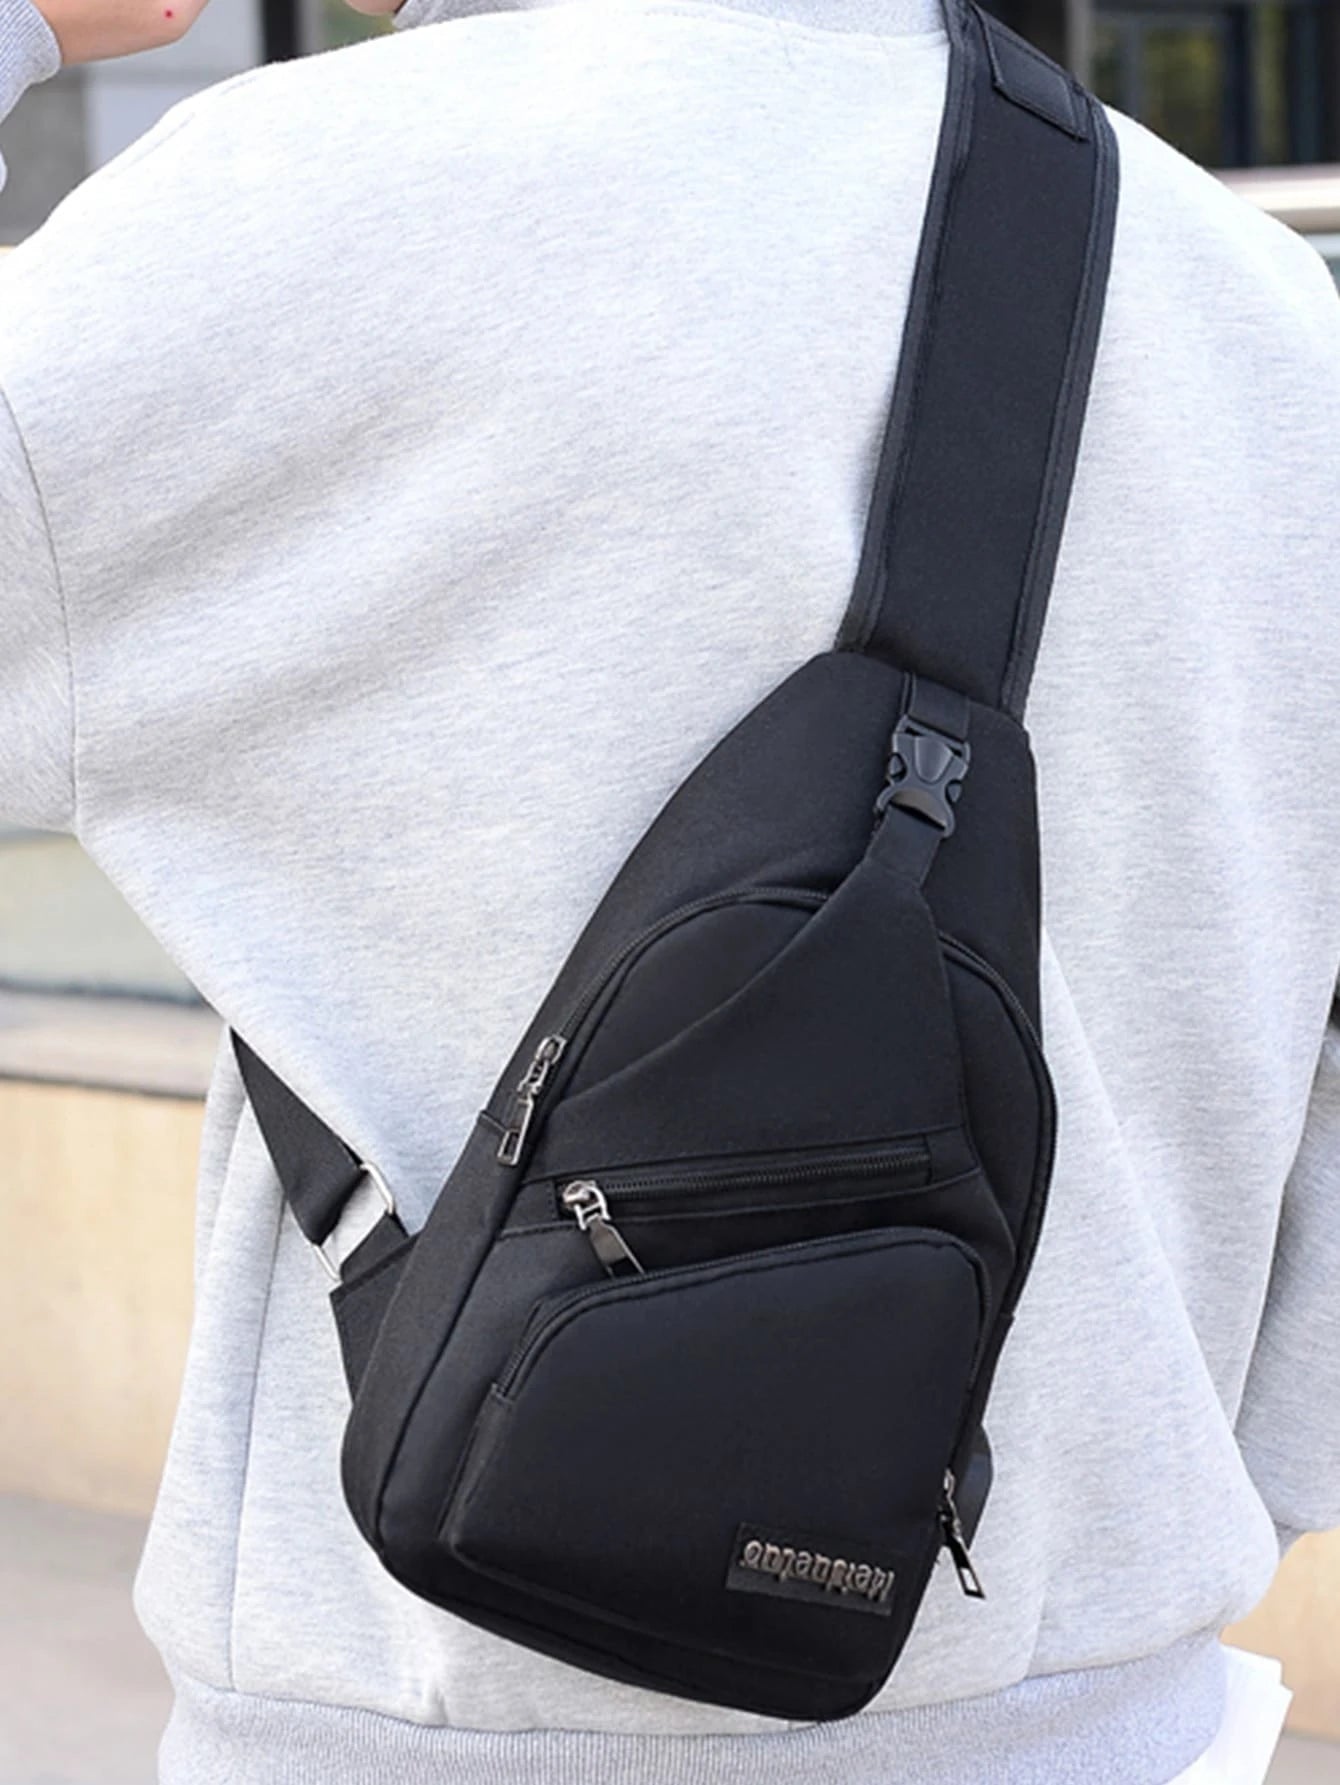 1pc New Chest Bag Men's Crossbody Shoulder Bag Fashion Casual Daypack Sports Travel Oxford Fabric Bag